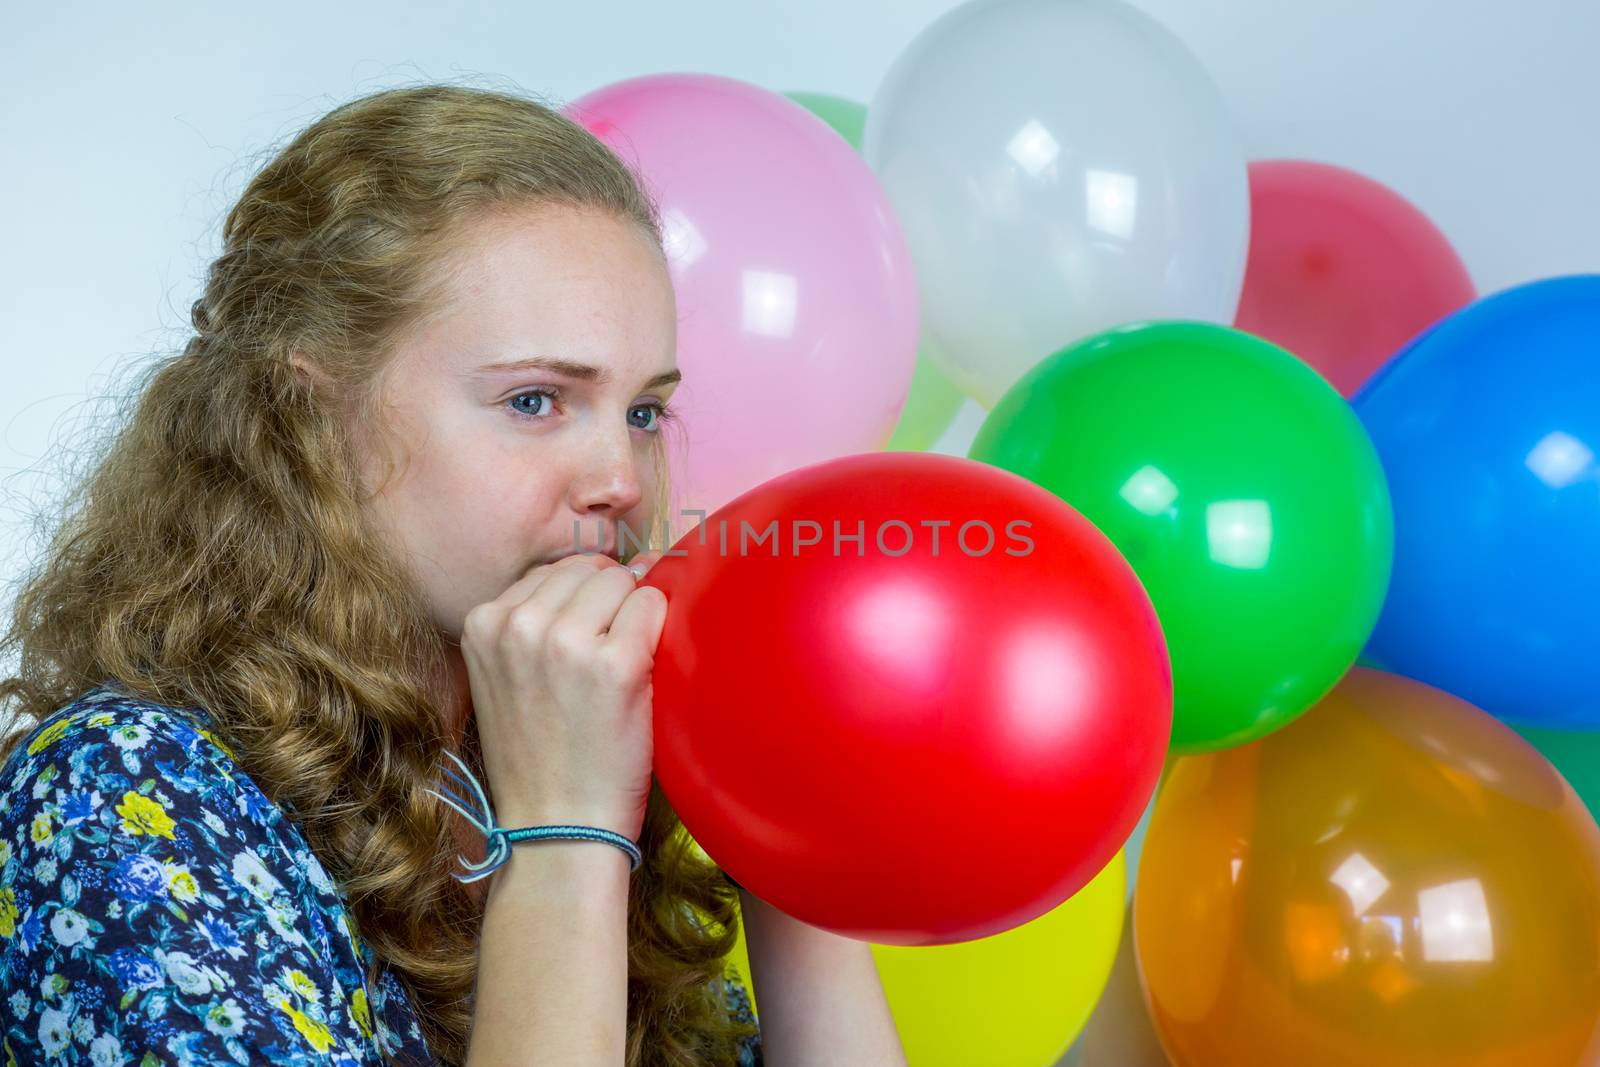 Teenage girl blowing inflating colored balloons by BenSchonewille